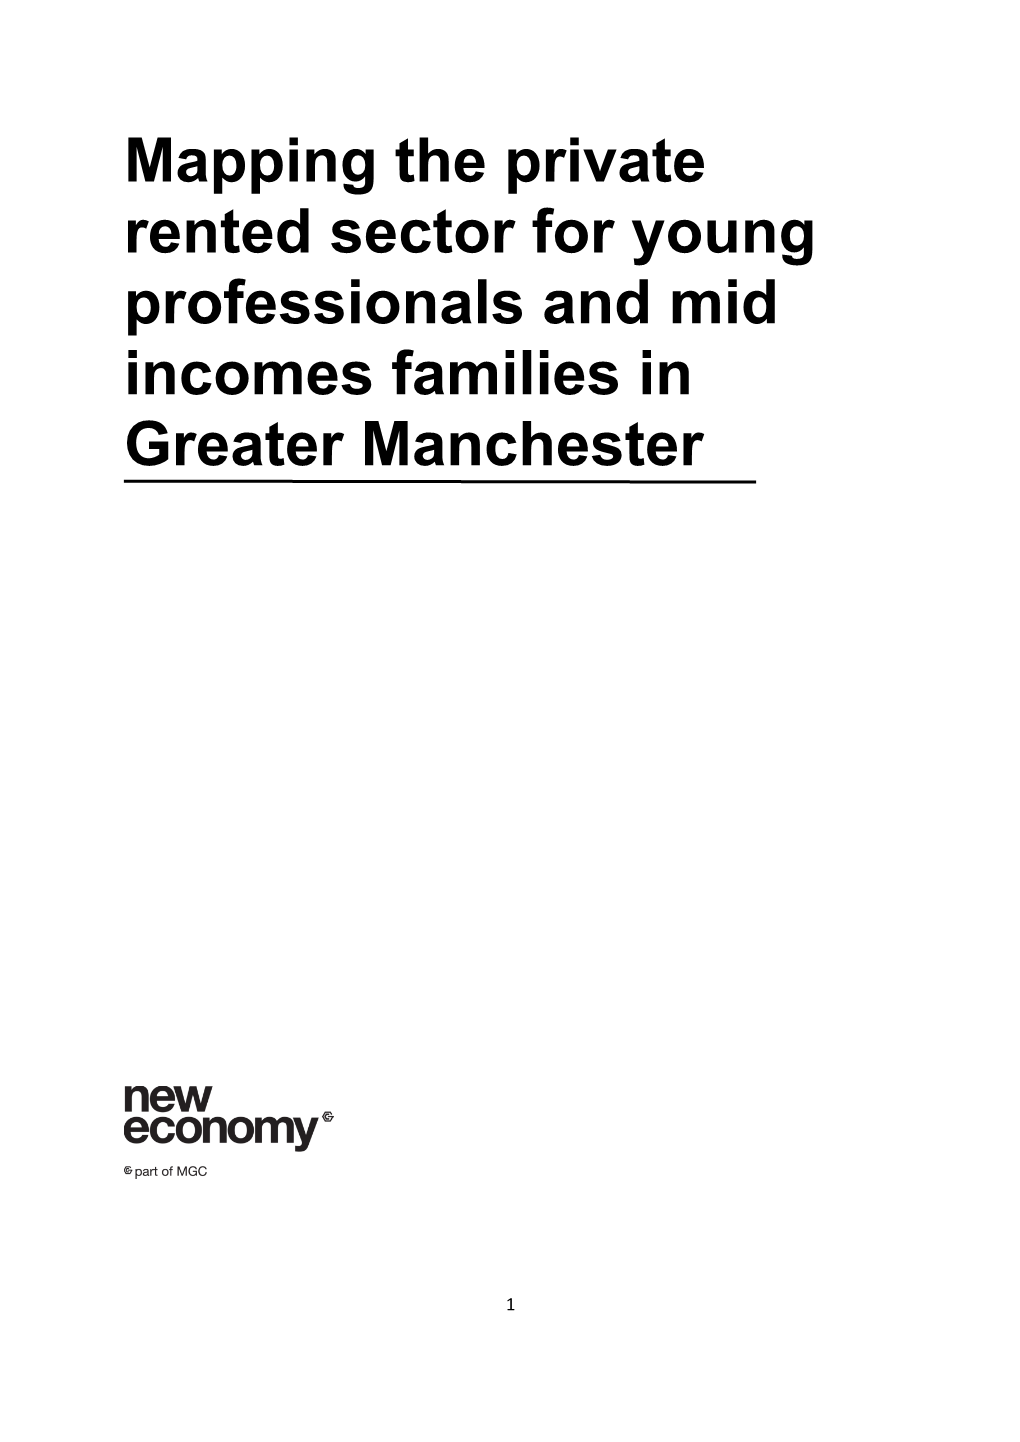 Mapping the Private Rented Sector for Young Professionals and Mid Incomes Families in Greater Manchester